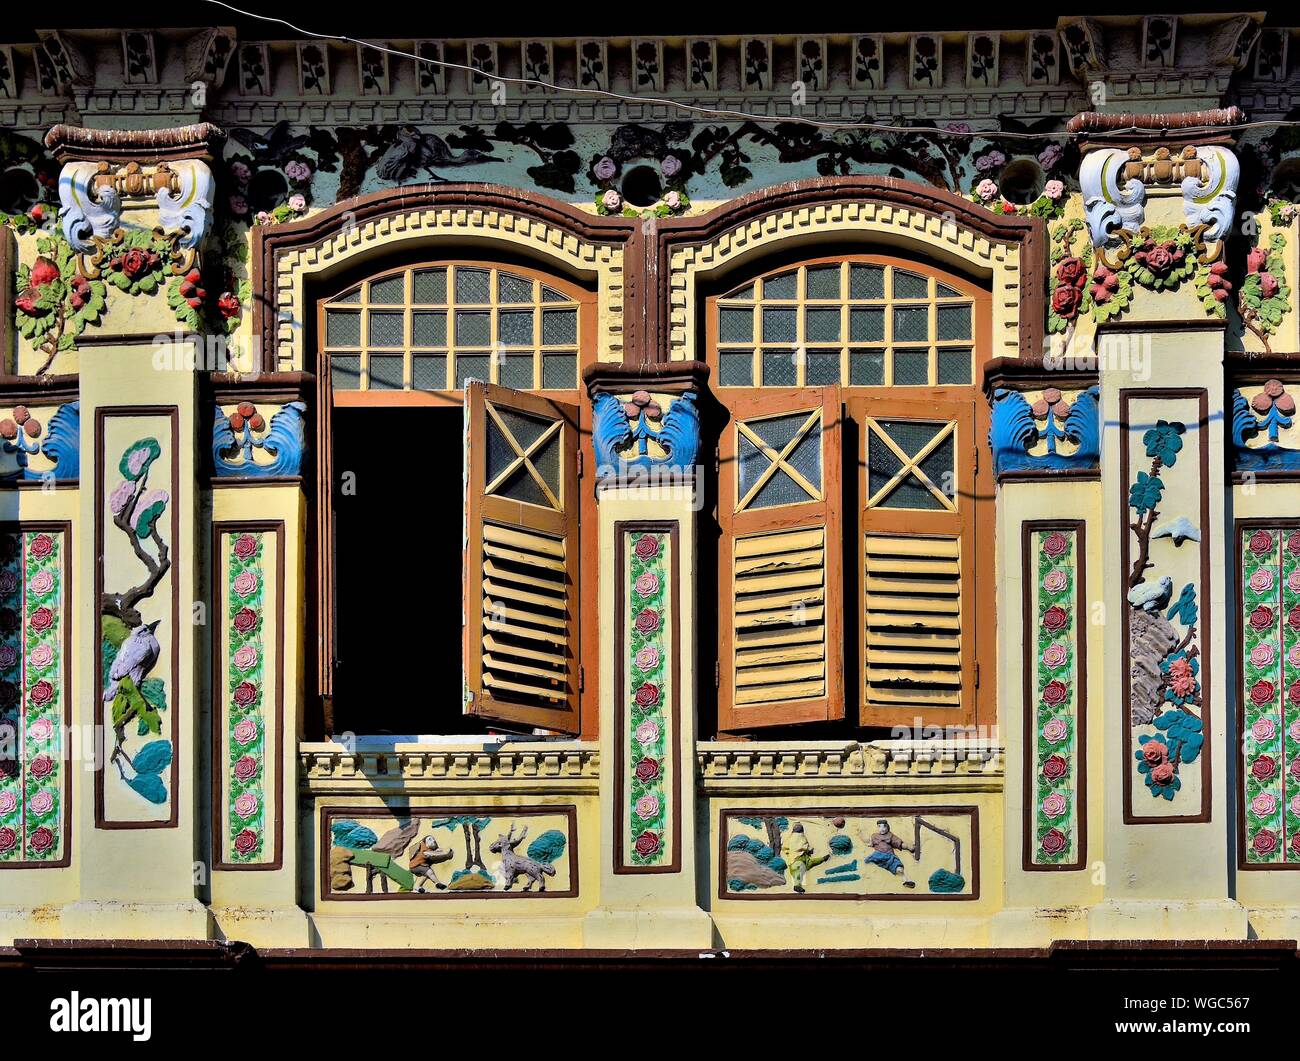 Front view of traditional Peranakan Straits Chinese shophouse exterior with antique wooden shutters and ornate carvings in Geylang, Singapore Stock Photo